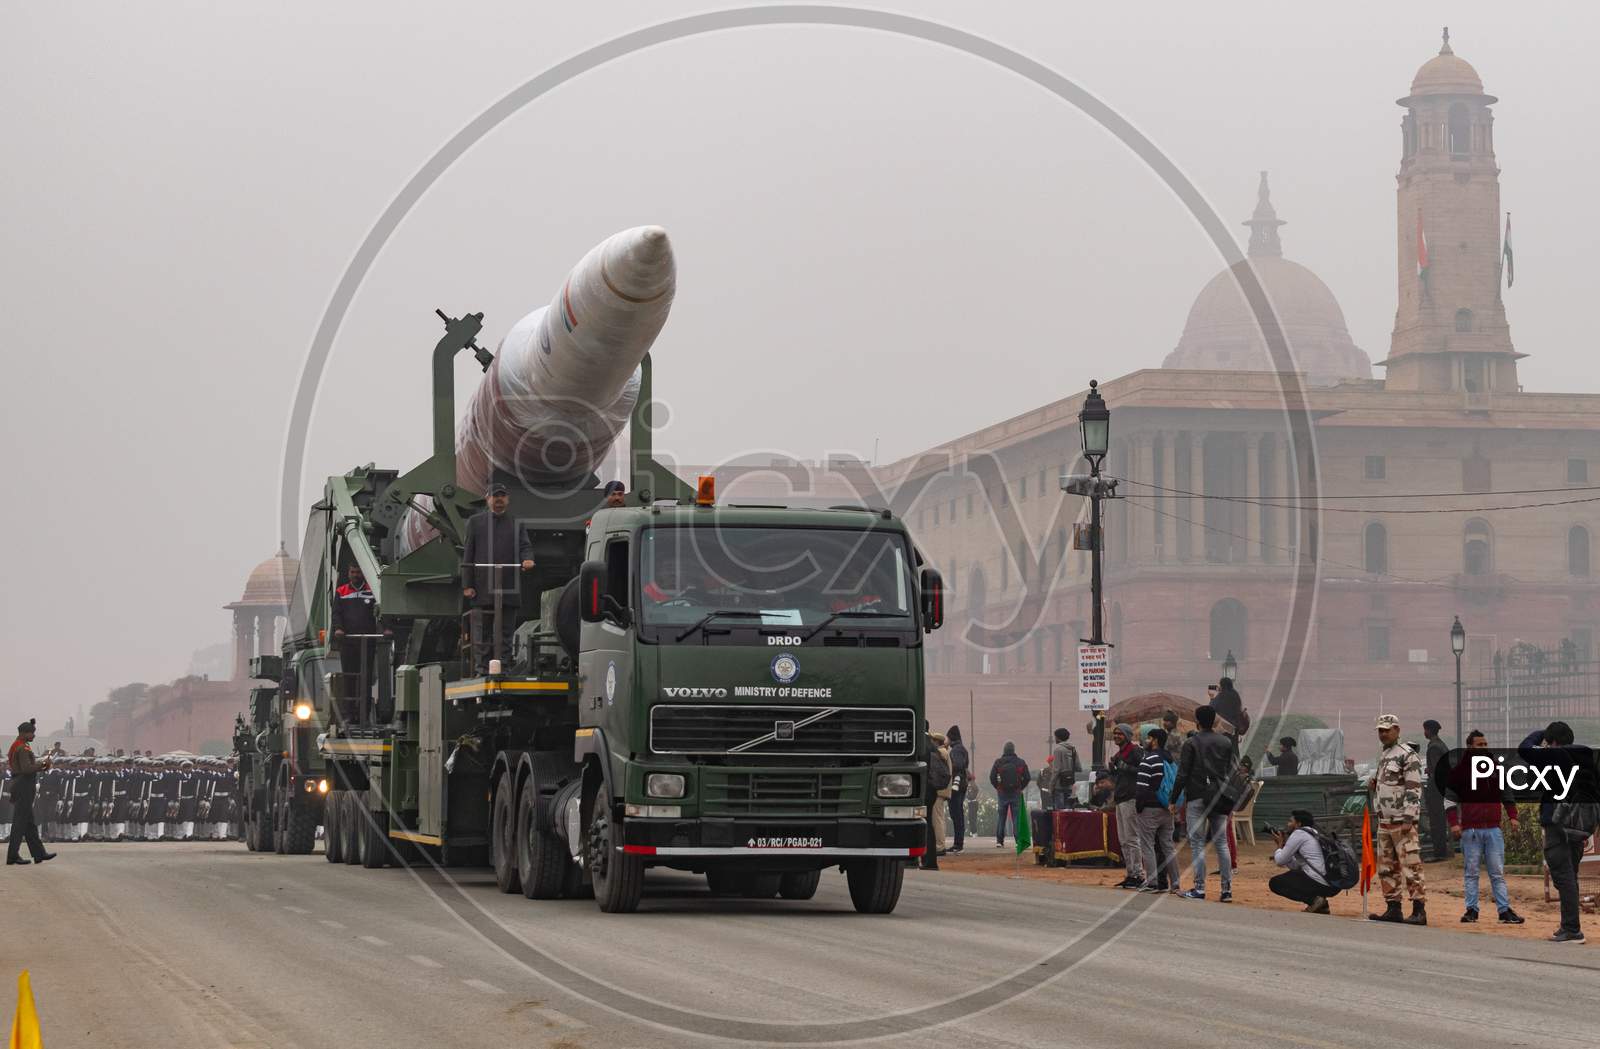 A Demonstration of Mission Shakti during parade rehearsal for 71st republic Day 2020